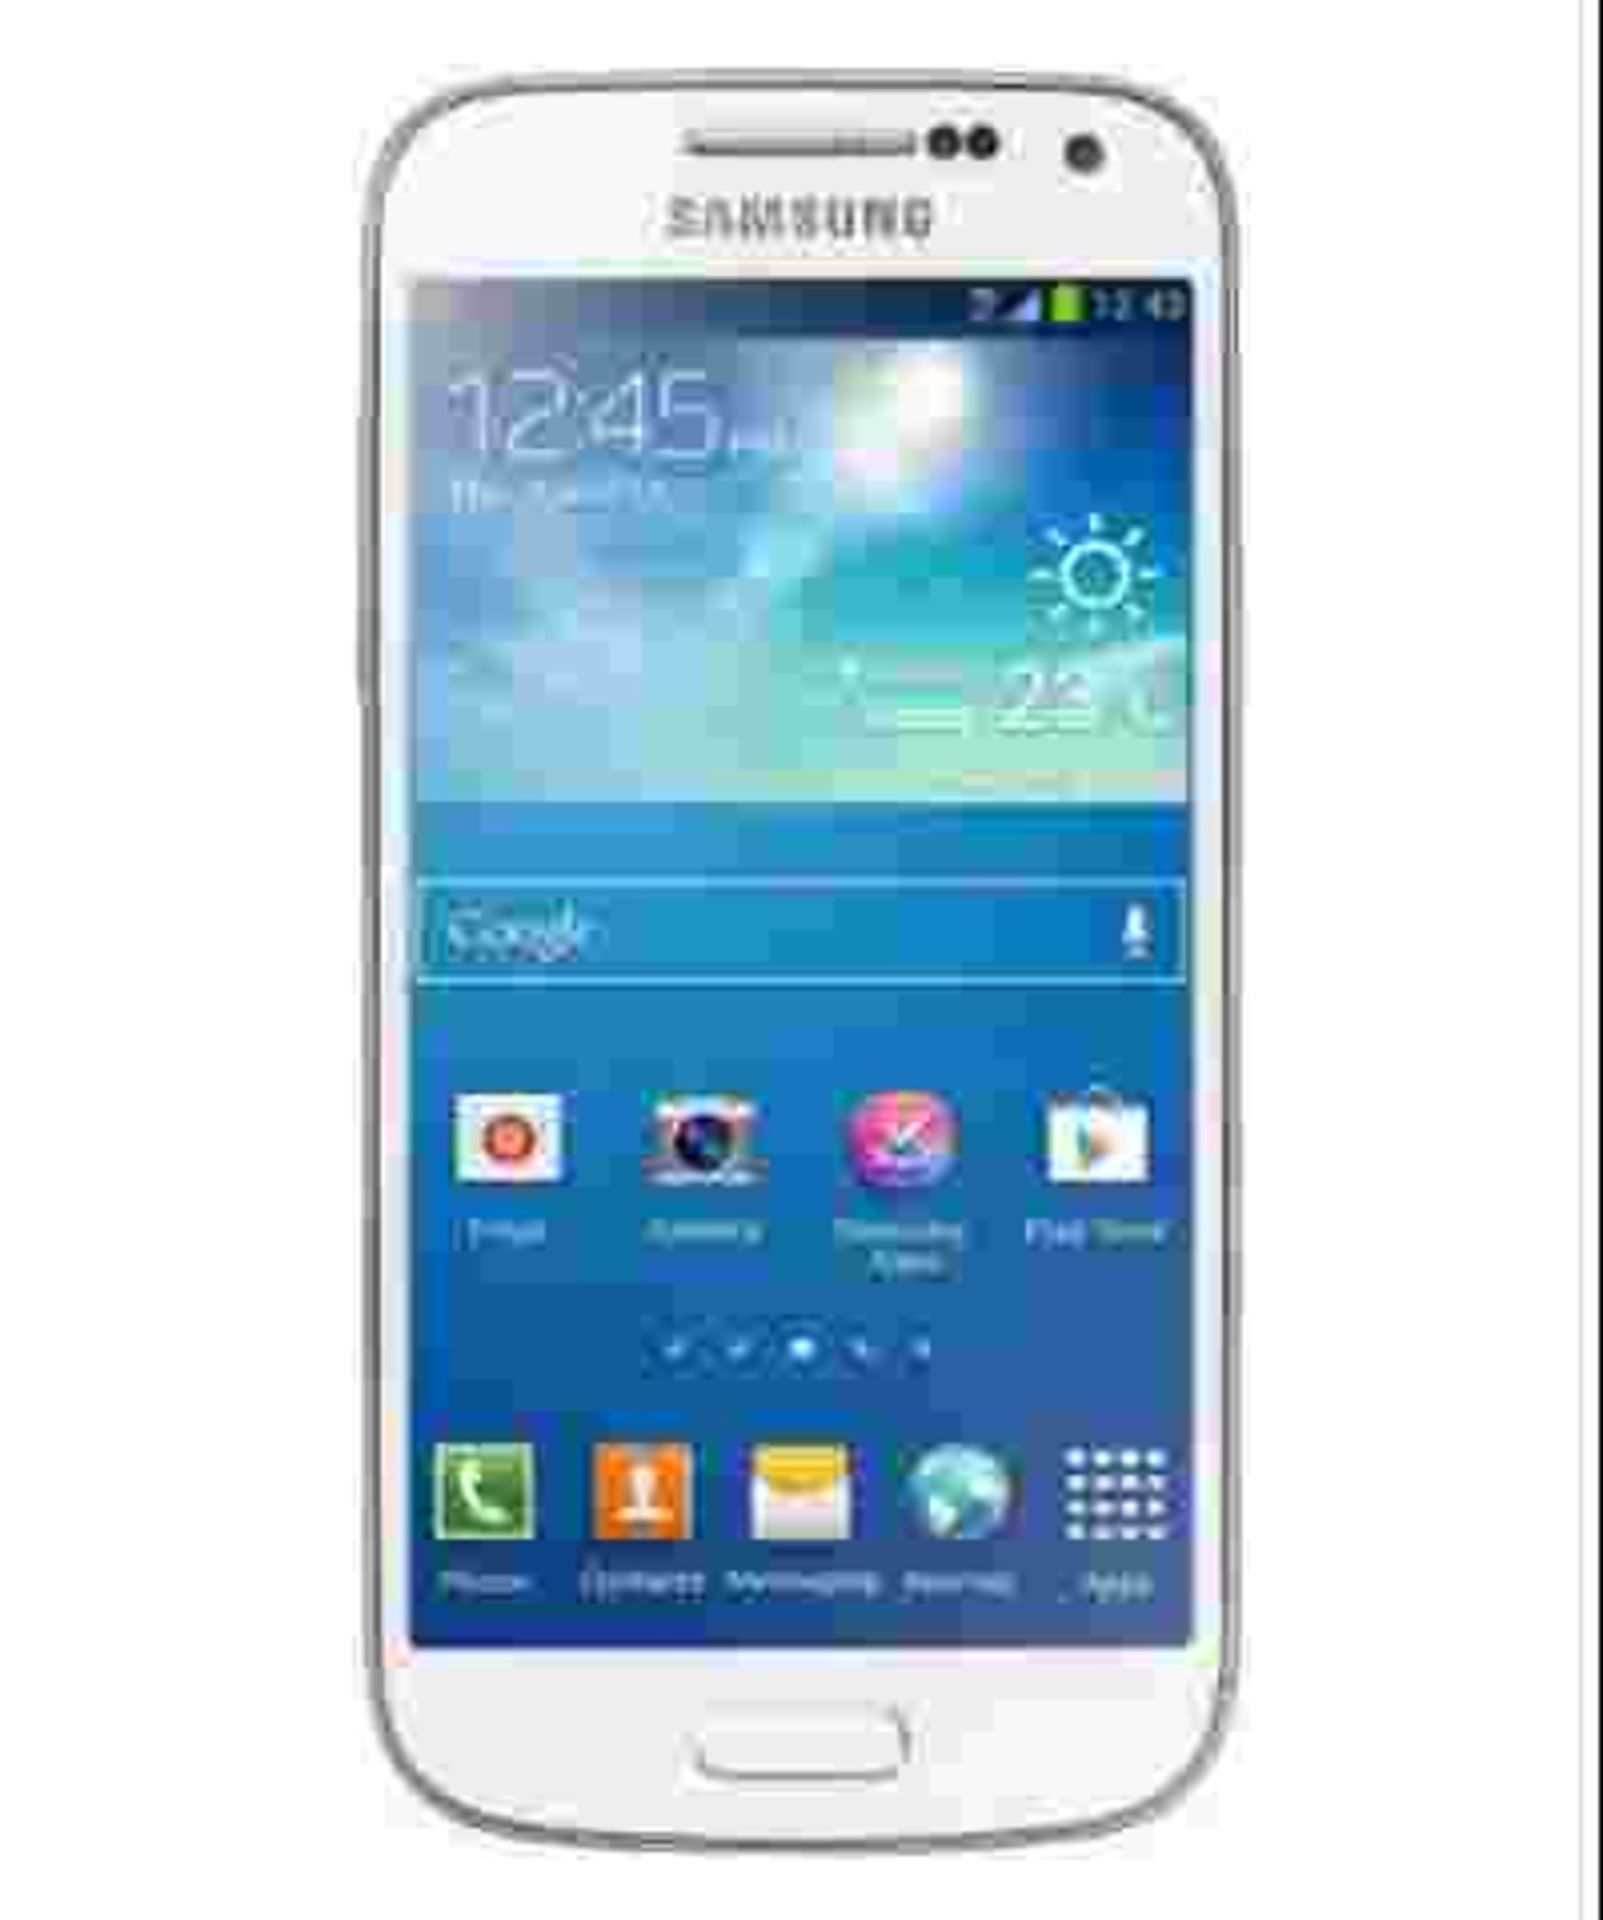 No VAT Grade A Samsung S4 Mini(I9190) Colours May Vary - Item Available After Approx 15 Working